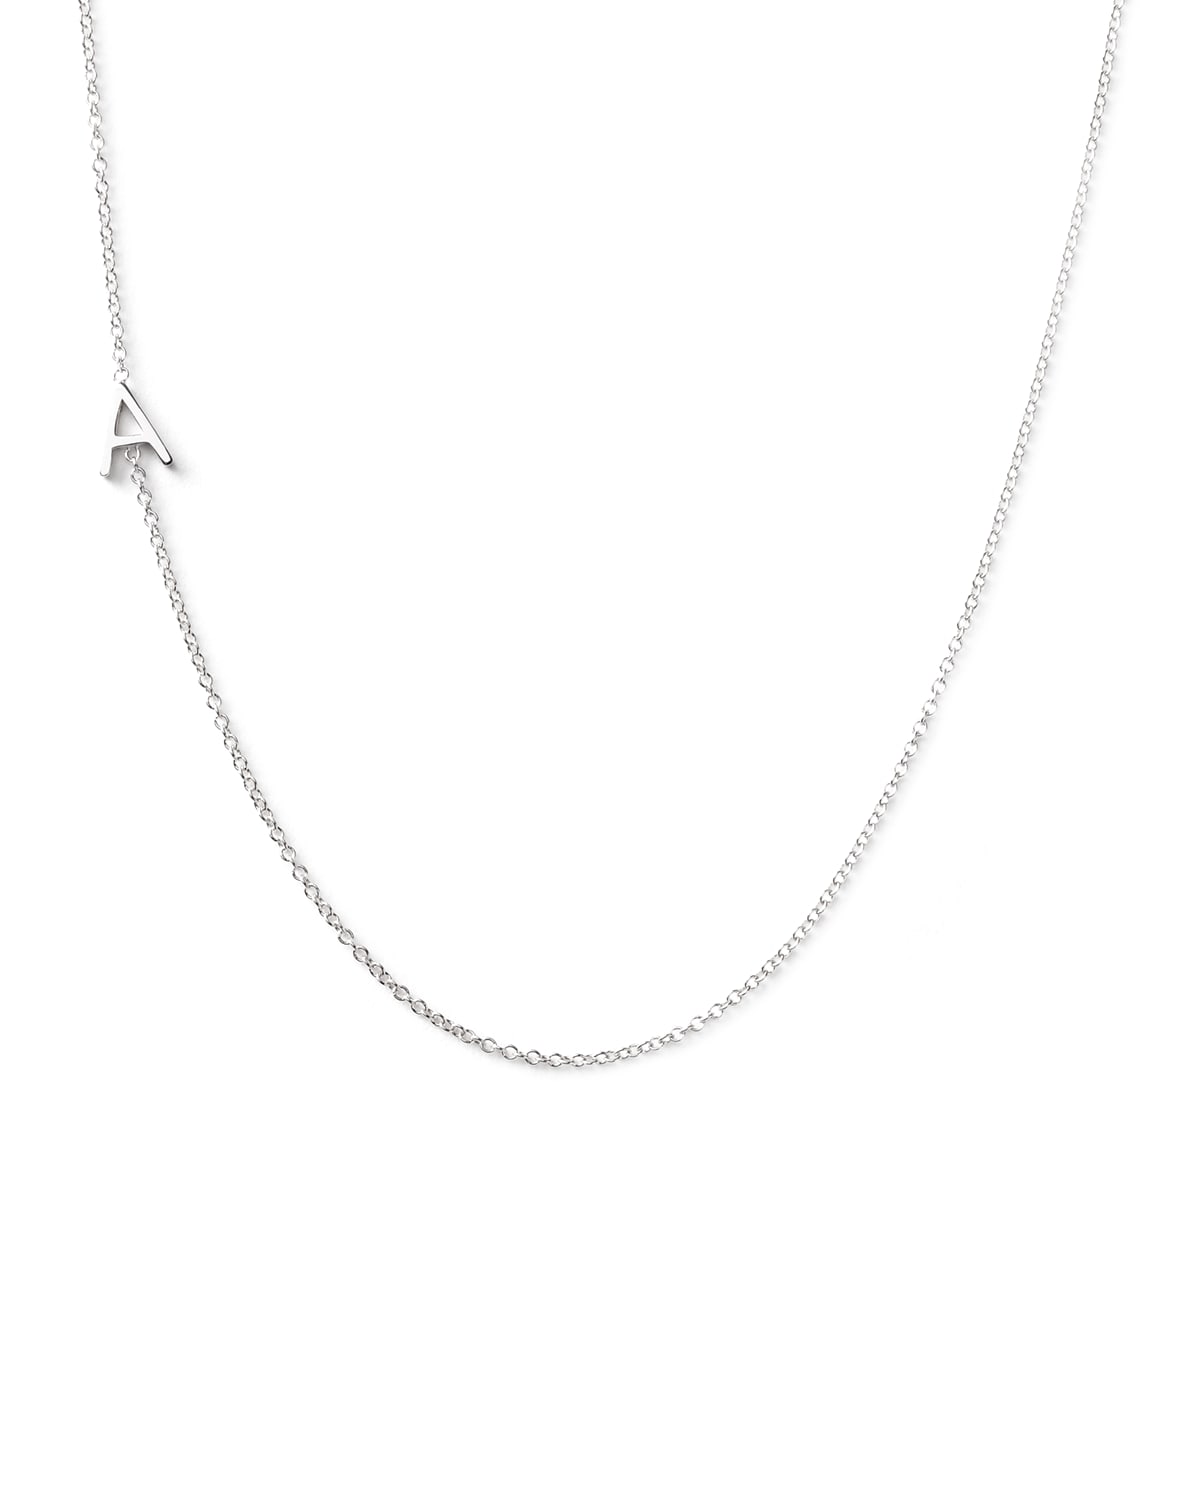 Maya Brenner Designs 14k White Gold Mini Letter Necklace In A